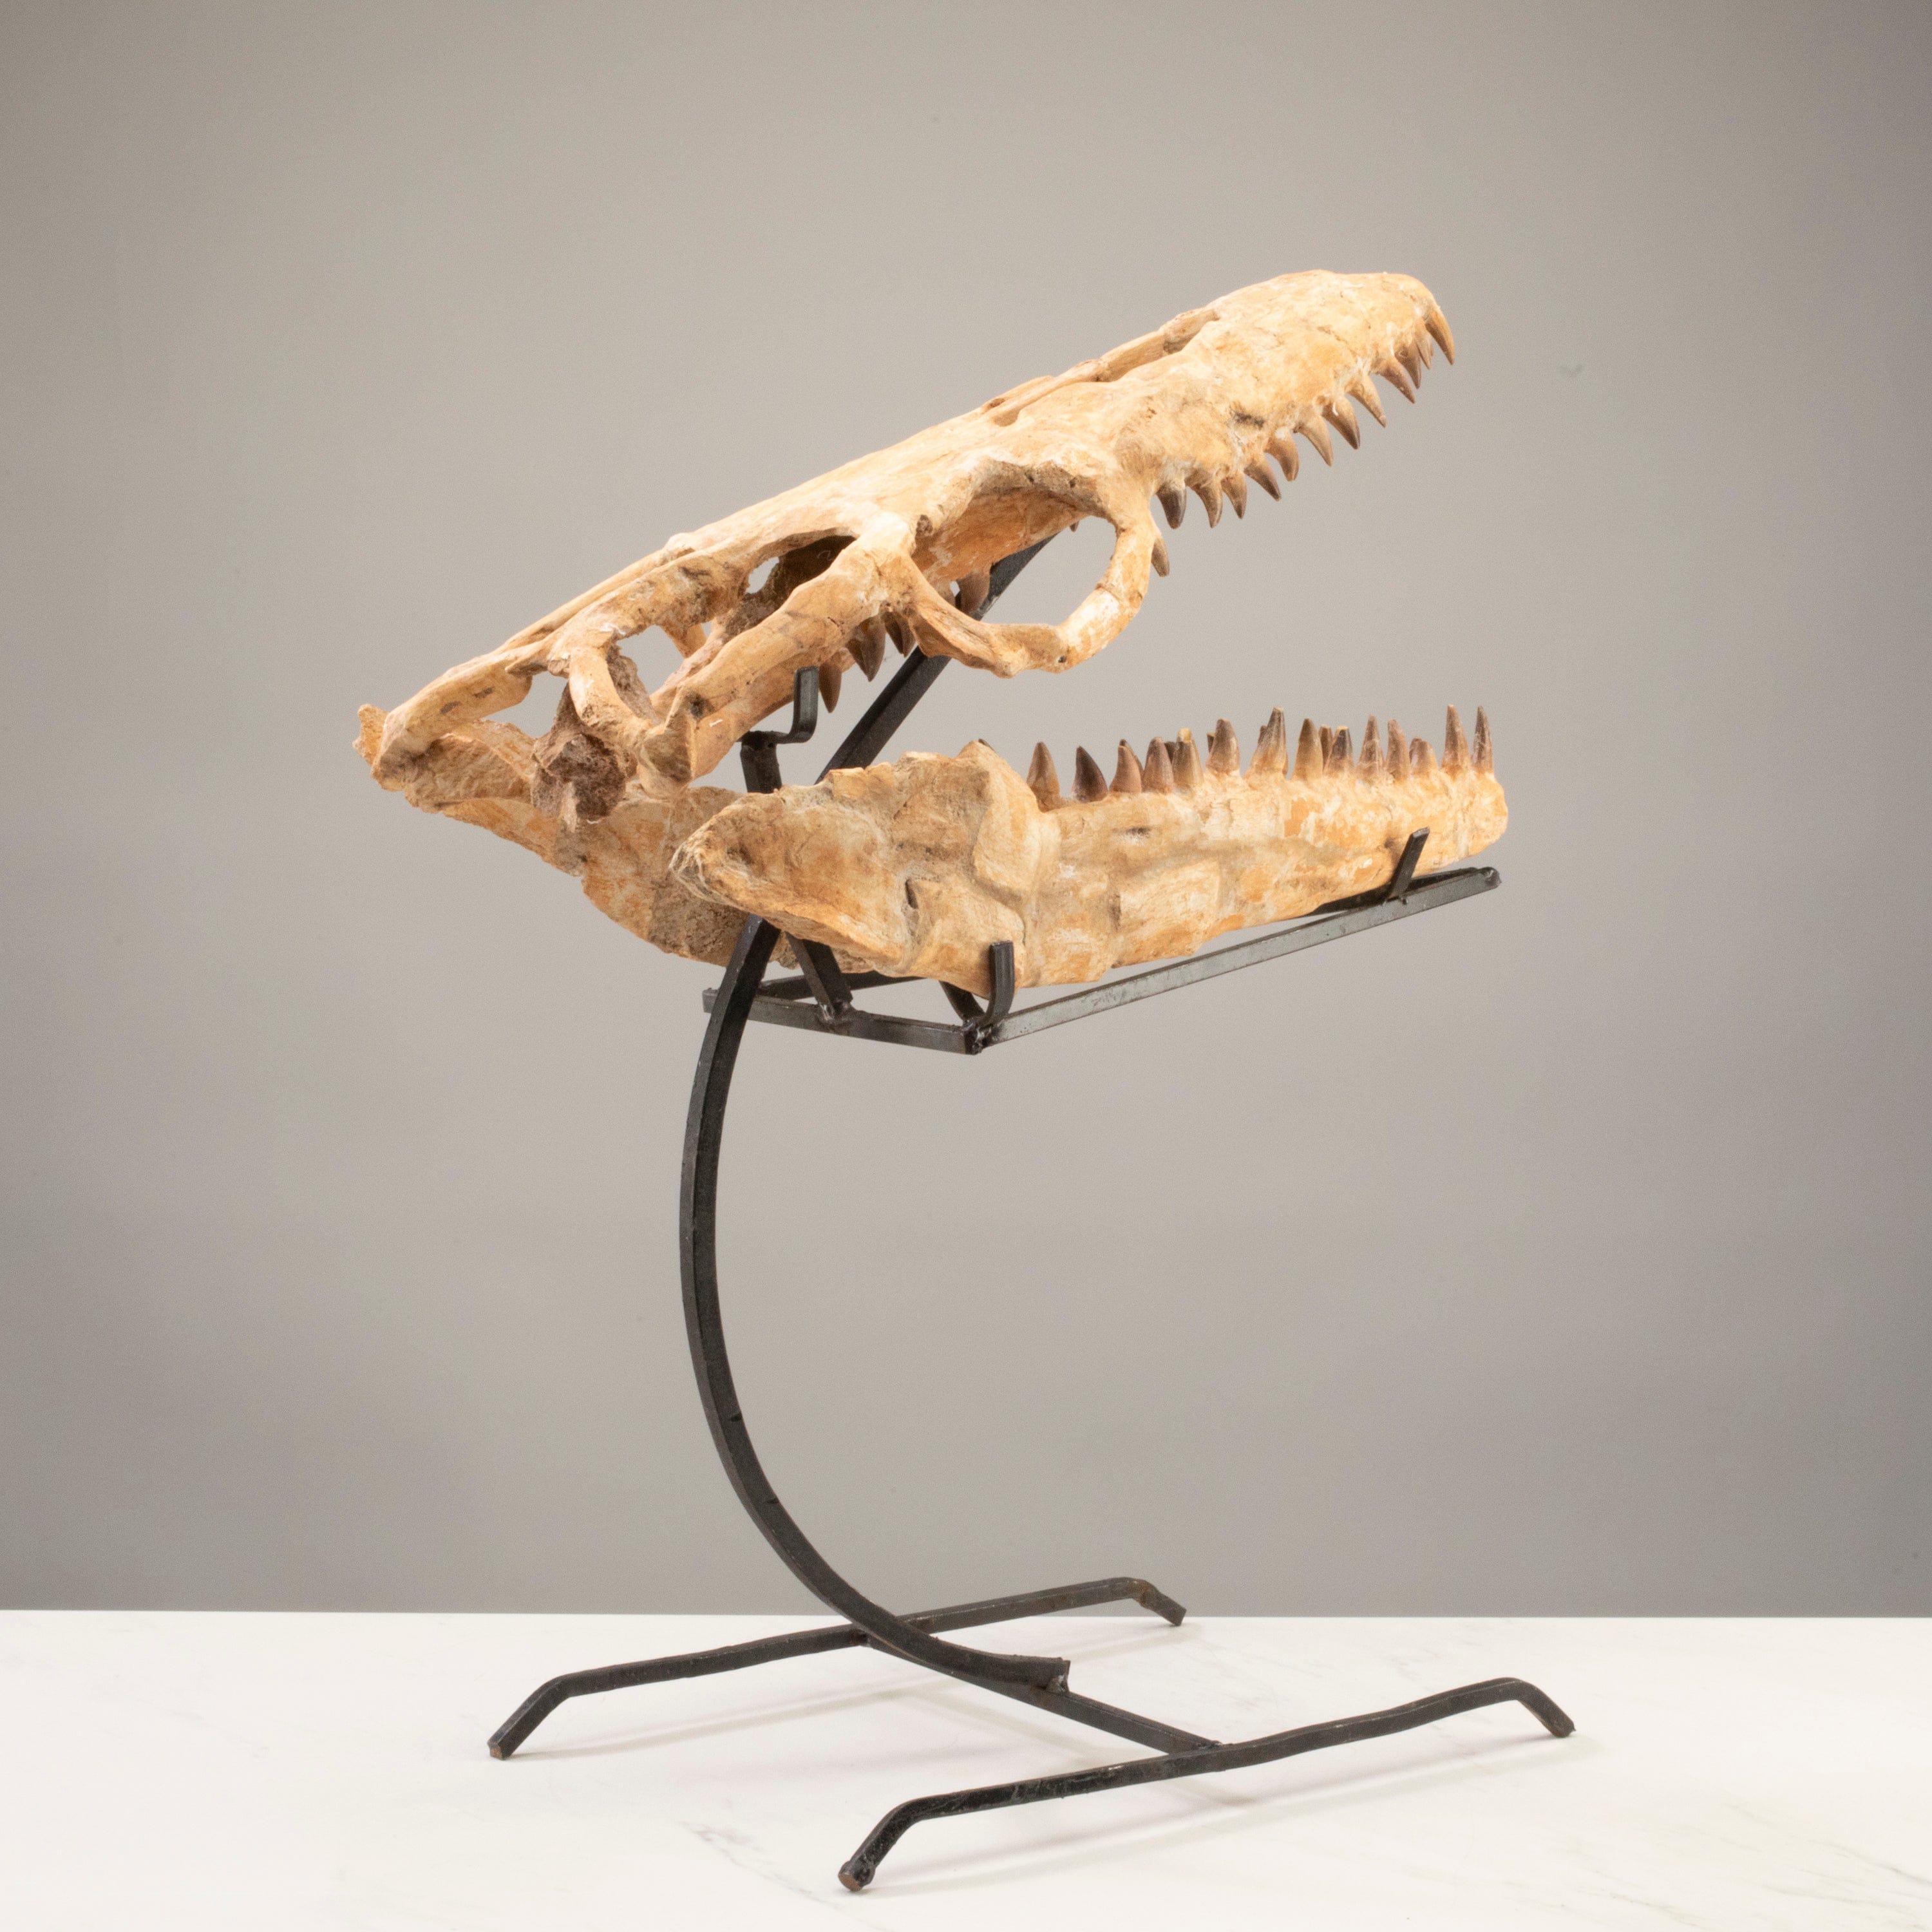 Kalifano Mosasaurus Fossils Moroccan Mosasaurus Jaw Fossil  on Custom Stand - 22" MOST32000.002